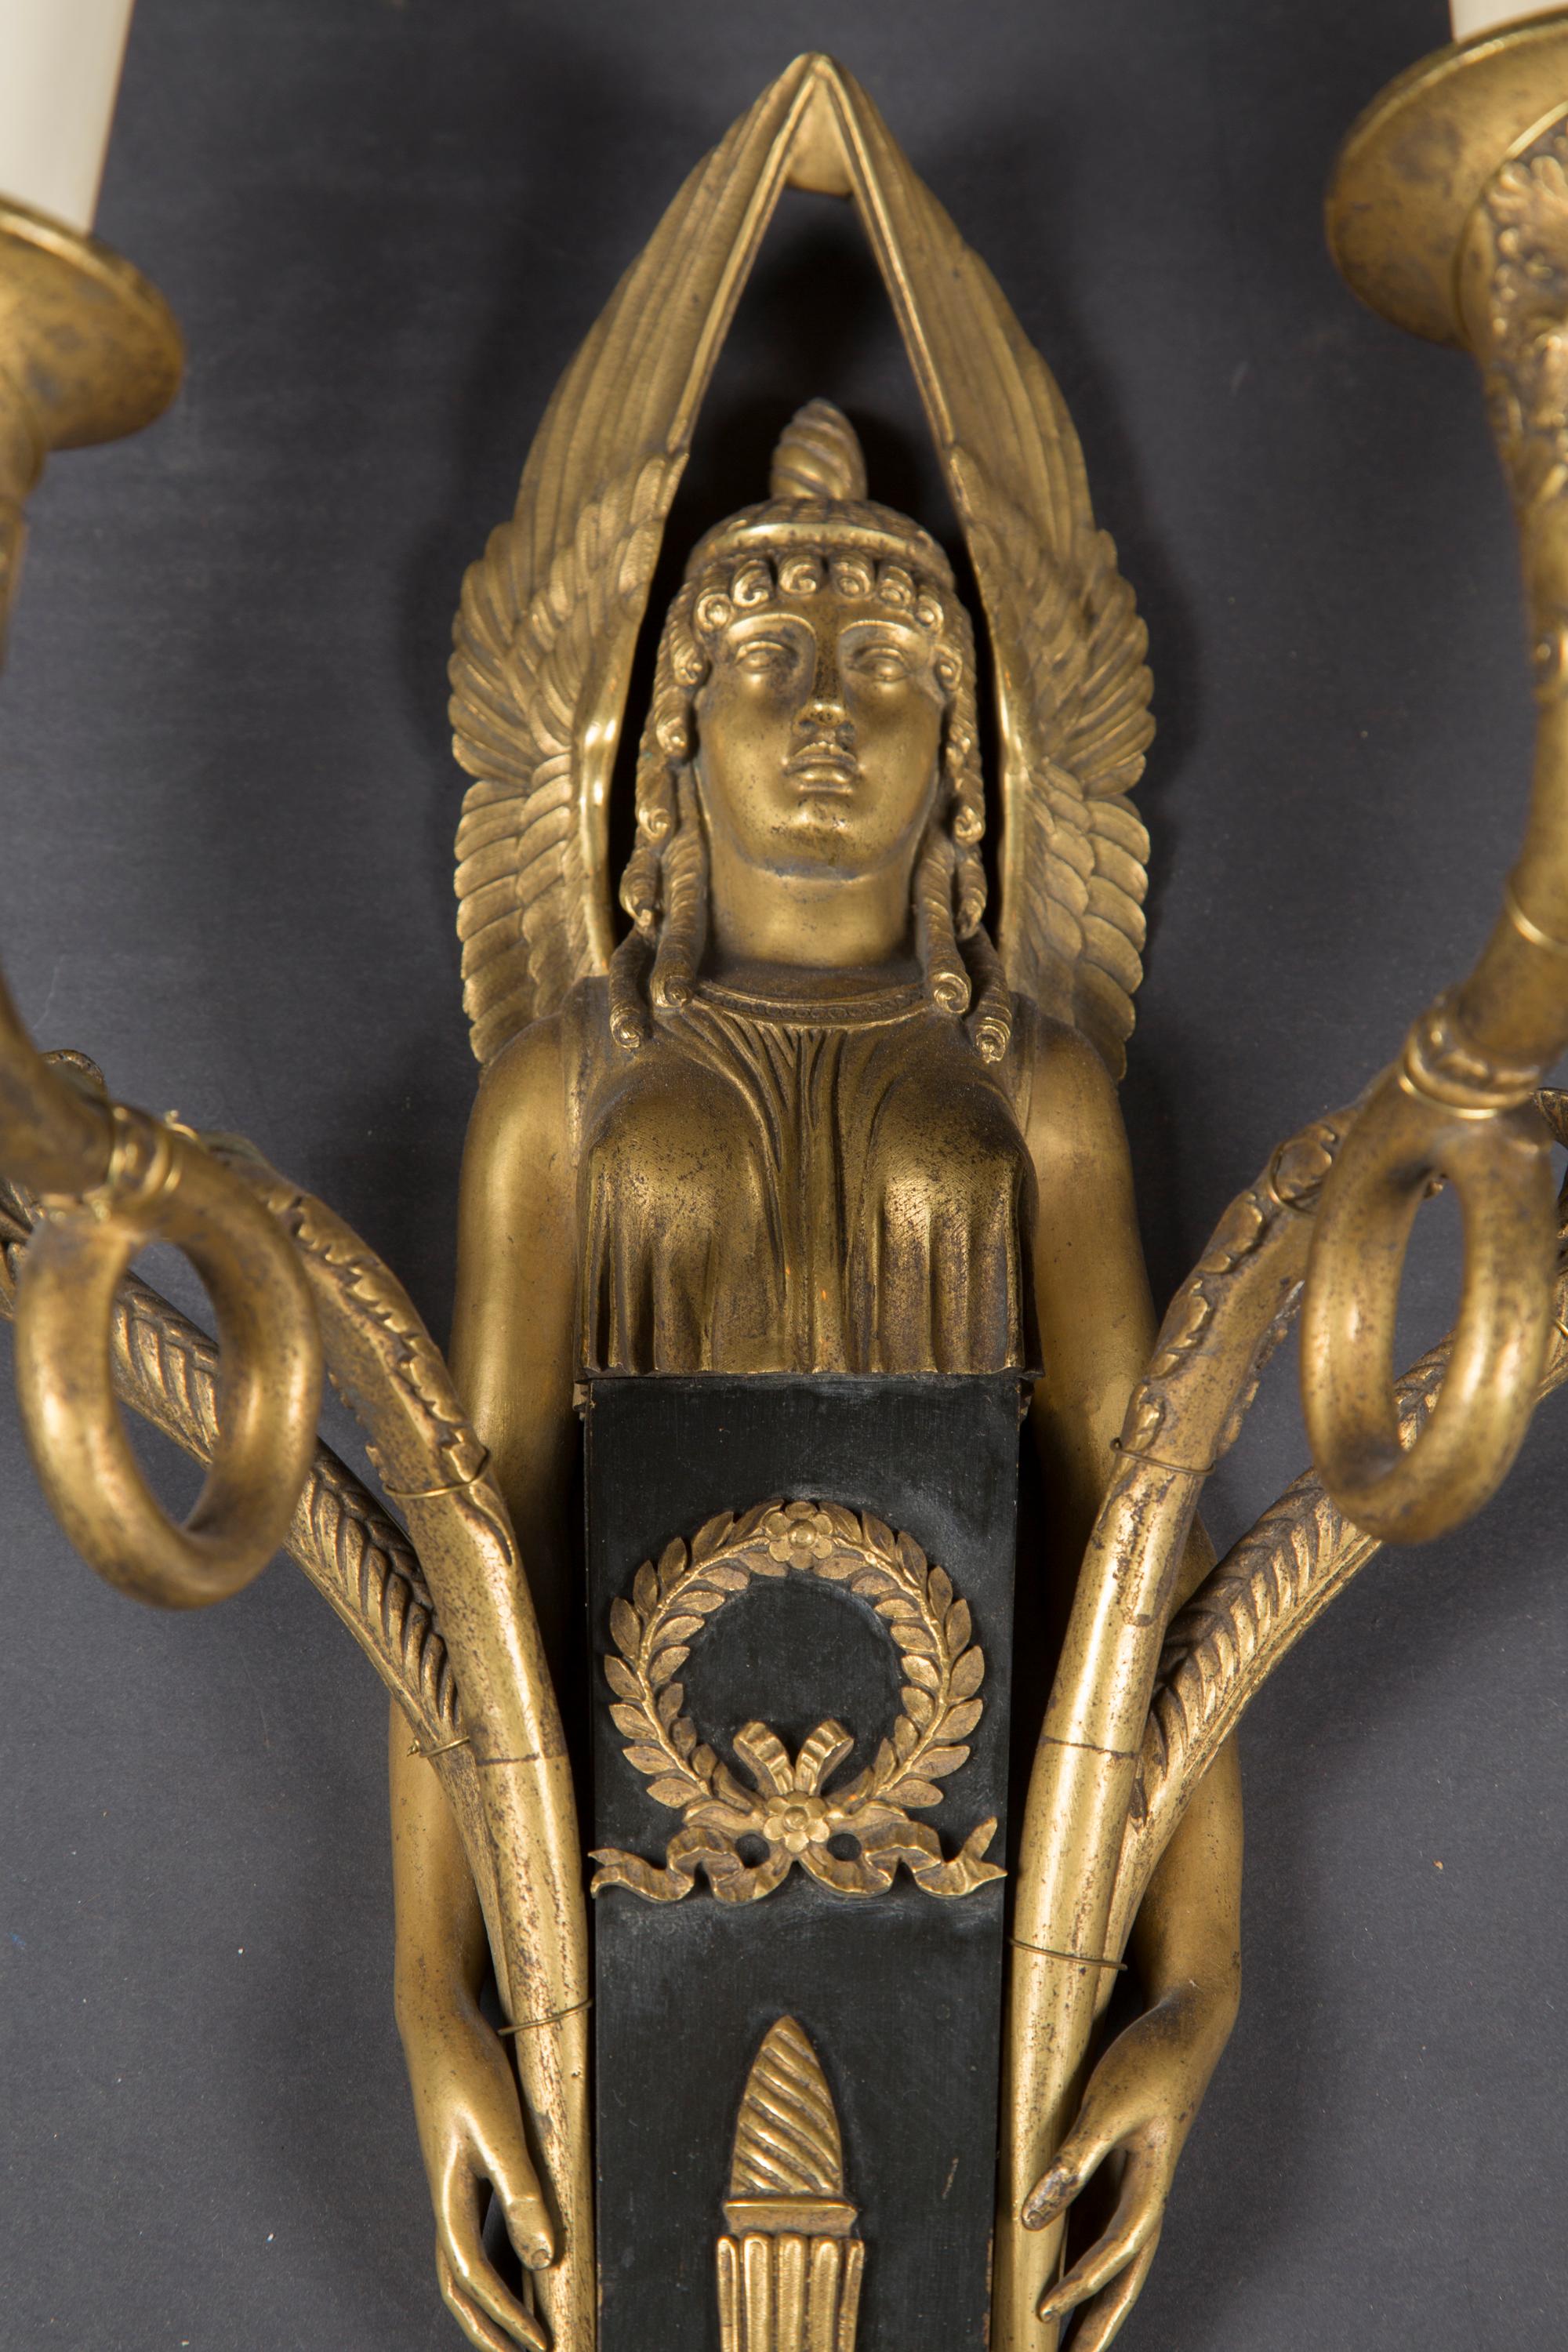 This gorgeous pair of 19th century Empire sconces are made of bronze and tole, and feature fantastically stylized Egyptian figures on each back plate. Note the details in the wings, the fabric and hands with fingers resting on the arms. The canter